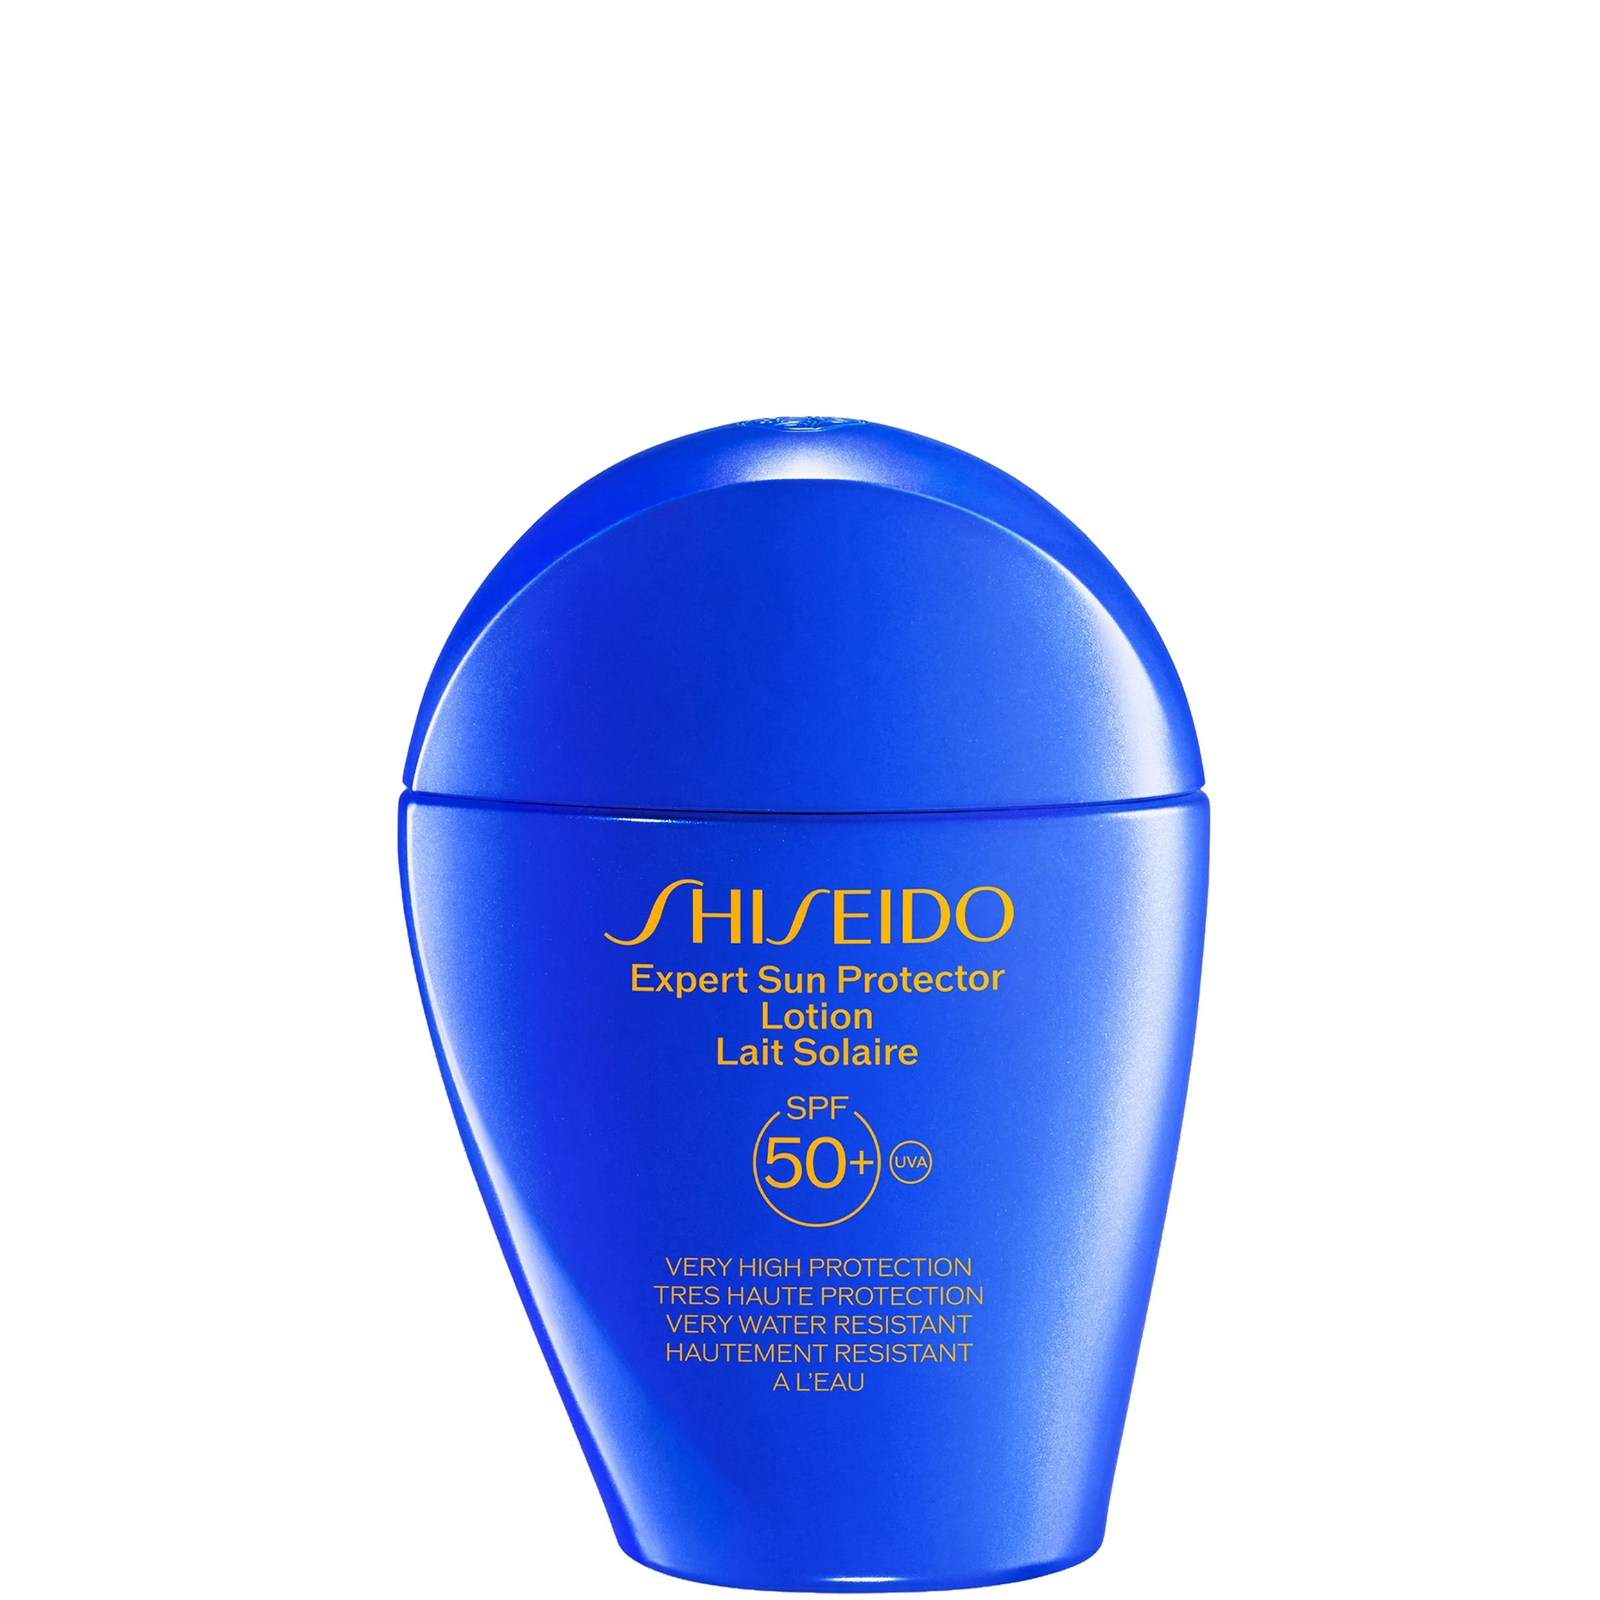 Image of Shiseido Expert Sun Protector Face and Body Lotion SPF50+ 50ml